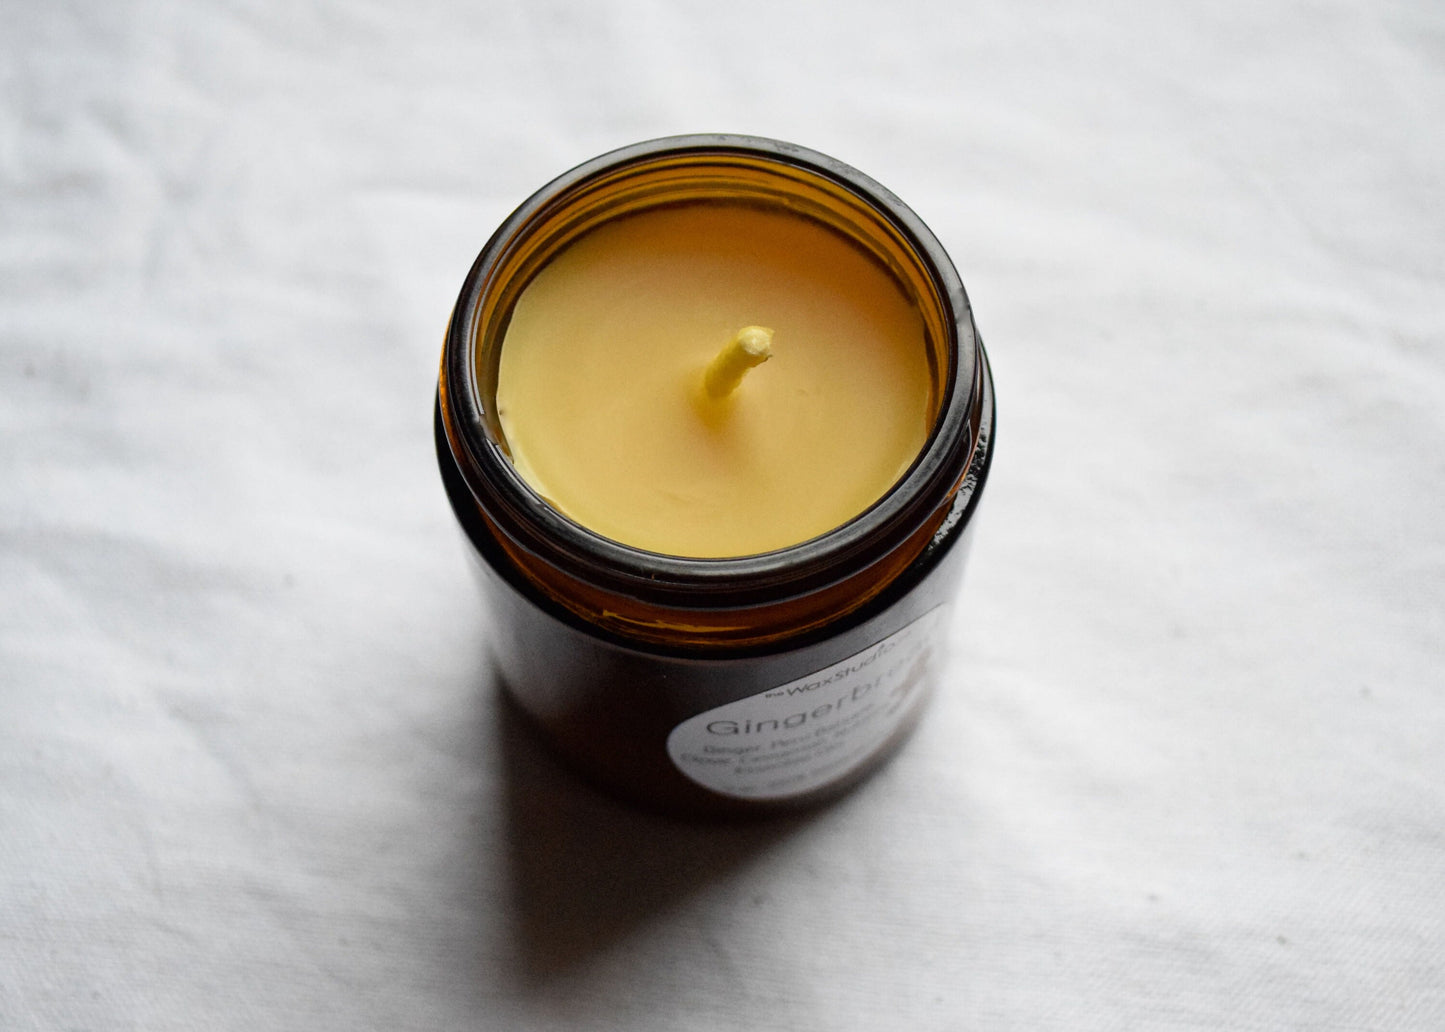 Peppermint Beeswax Aromatherapy Candle / Glass Jar Candle, Beeswax Candle with Essential Oil, Peppermint, Candle, Jar Candle, Amber Glass